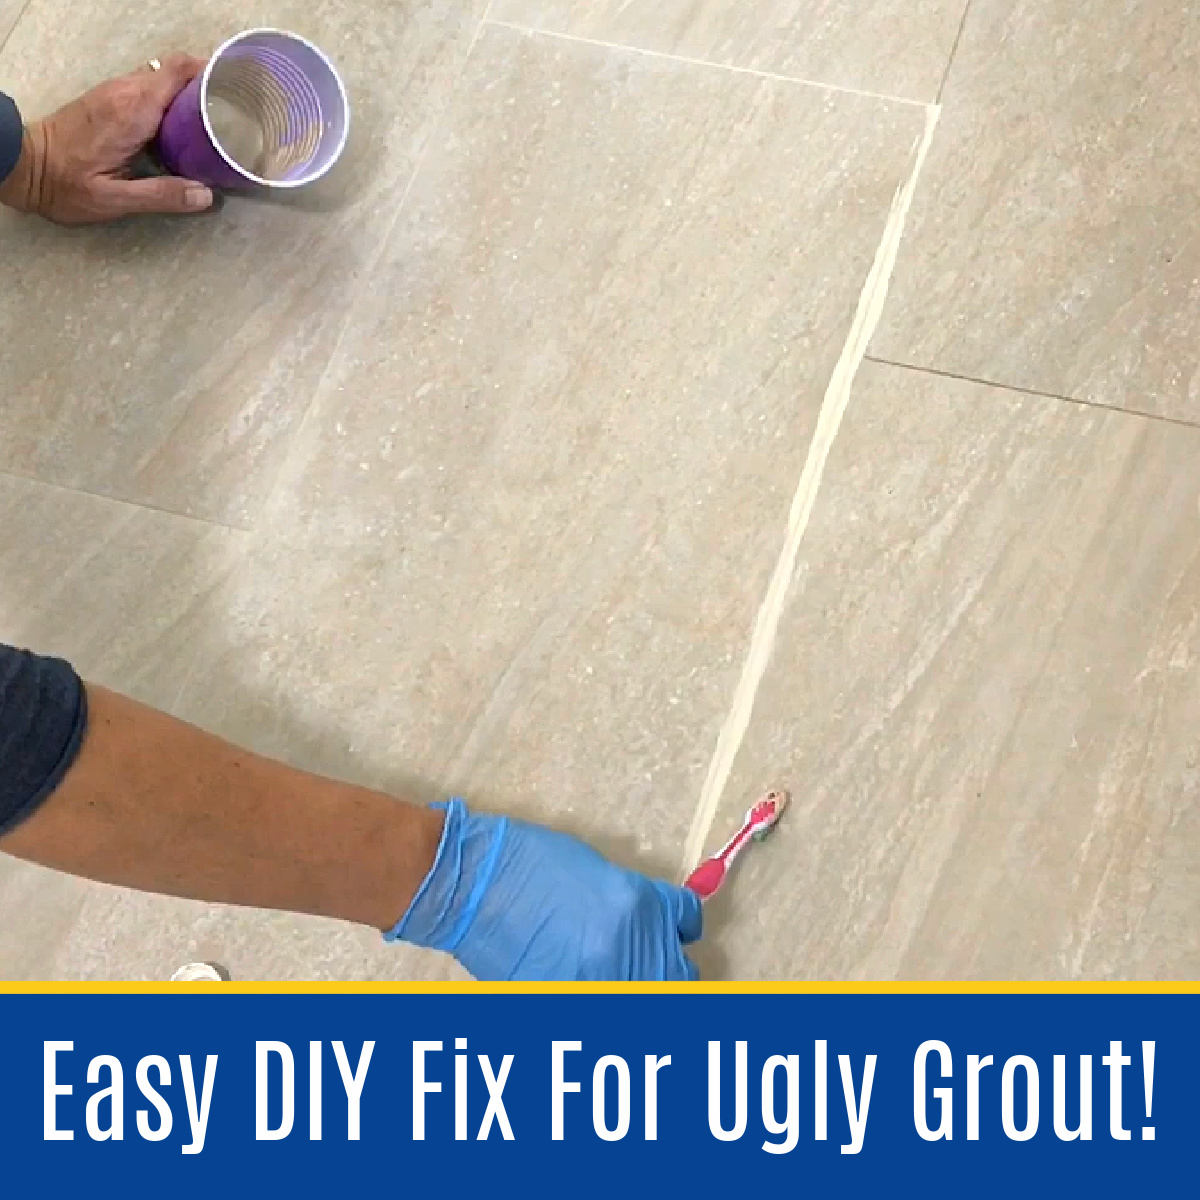 How to Regrout Bathroom Tile in 5 Easy Steps